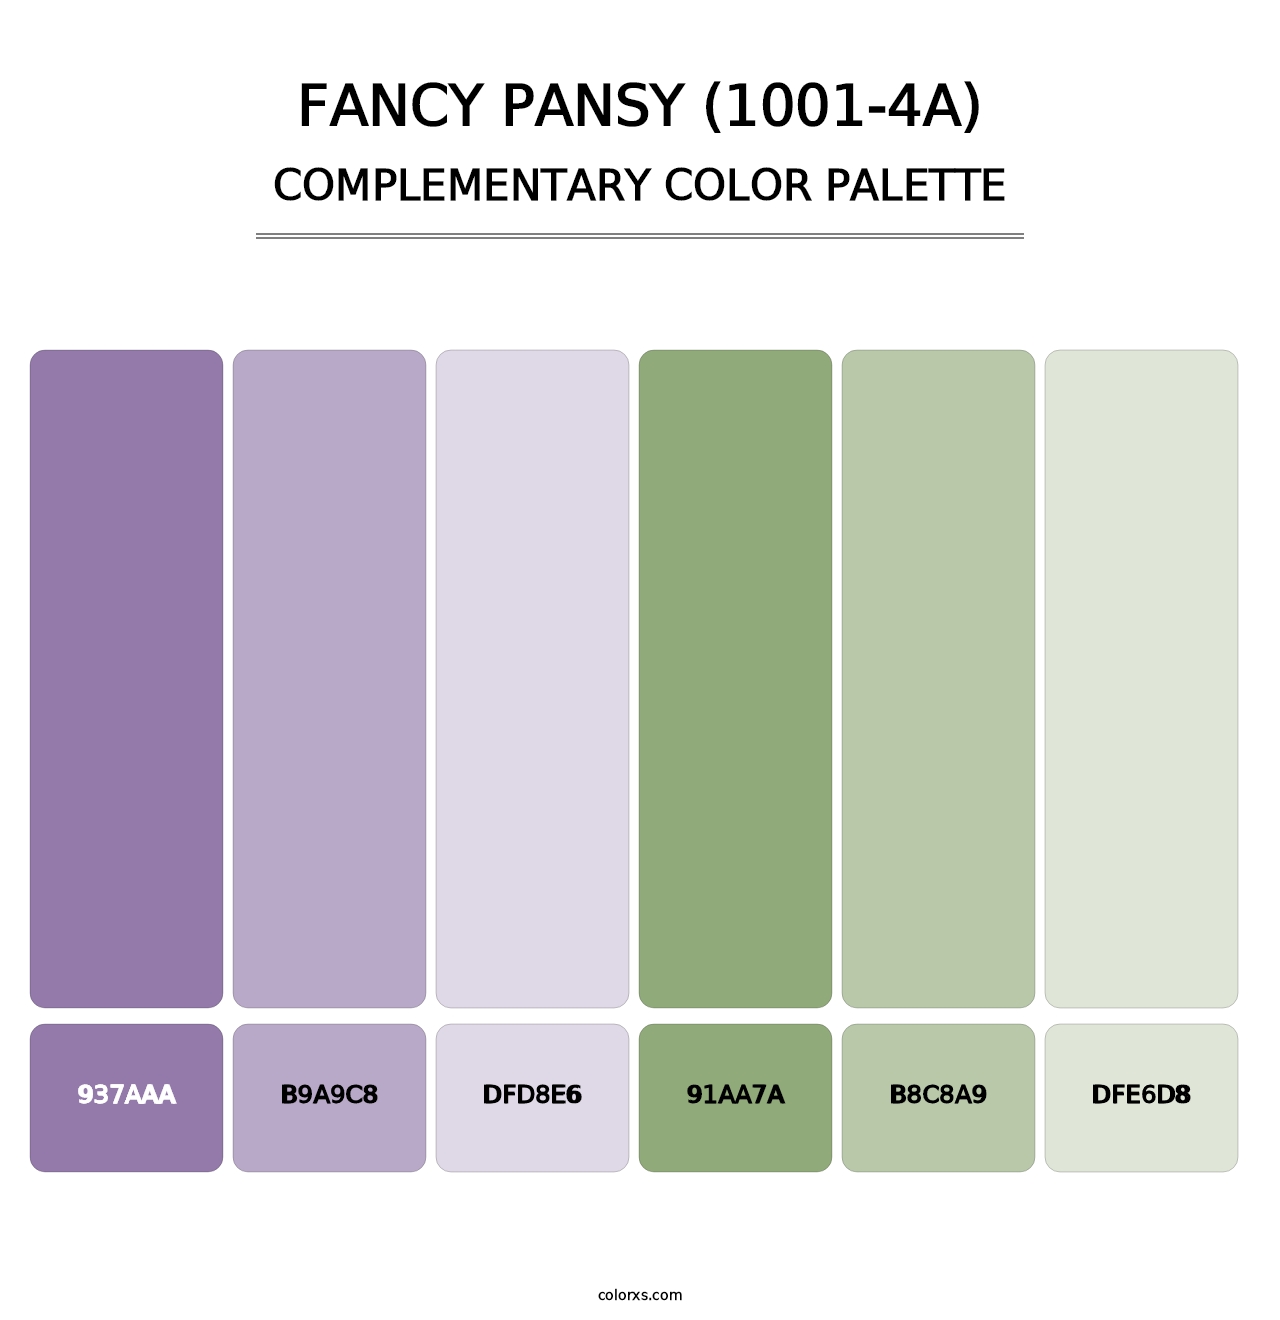 Fancy Pansy (1001-4A) - Complementary Color Palette